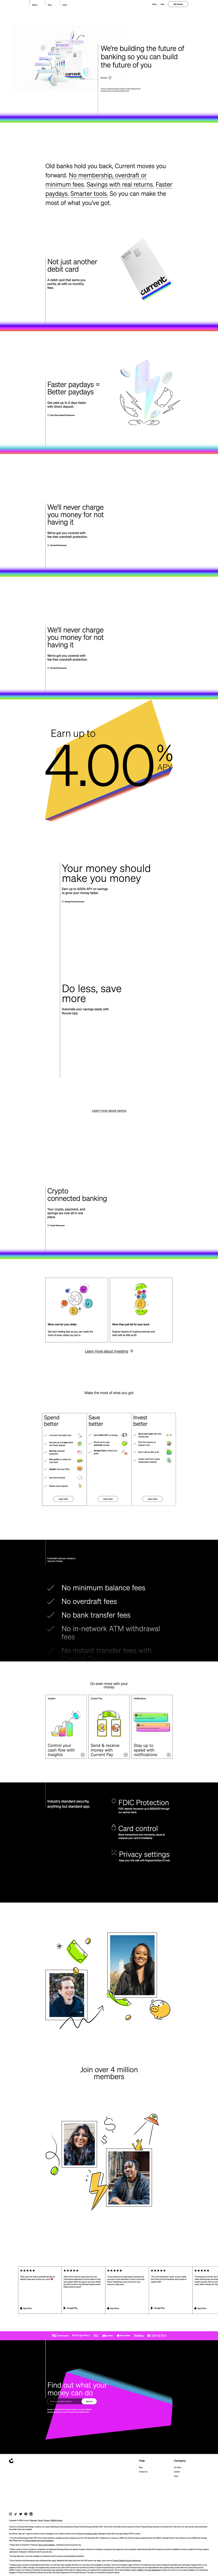 Current Landing Page Example: We're building the future of banking so you can build the future of you.